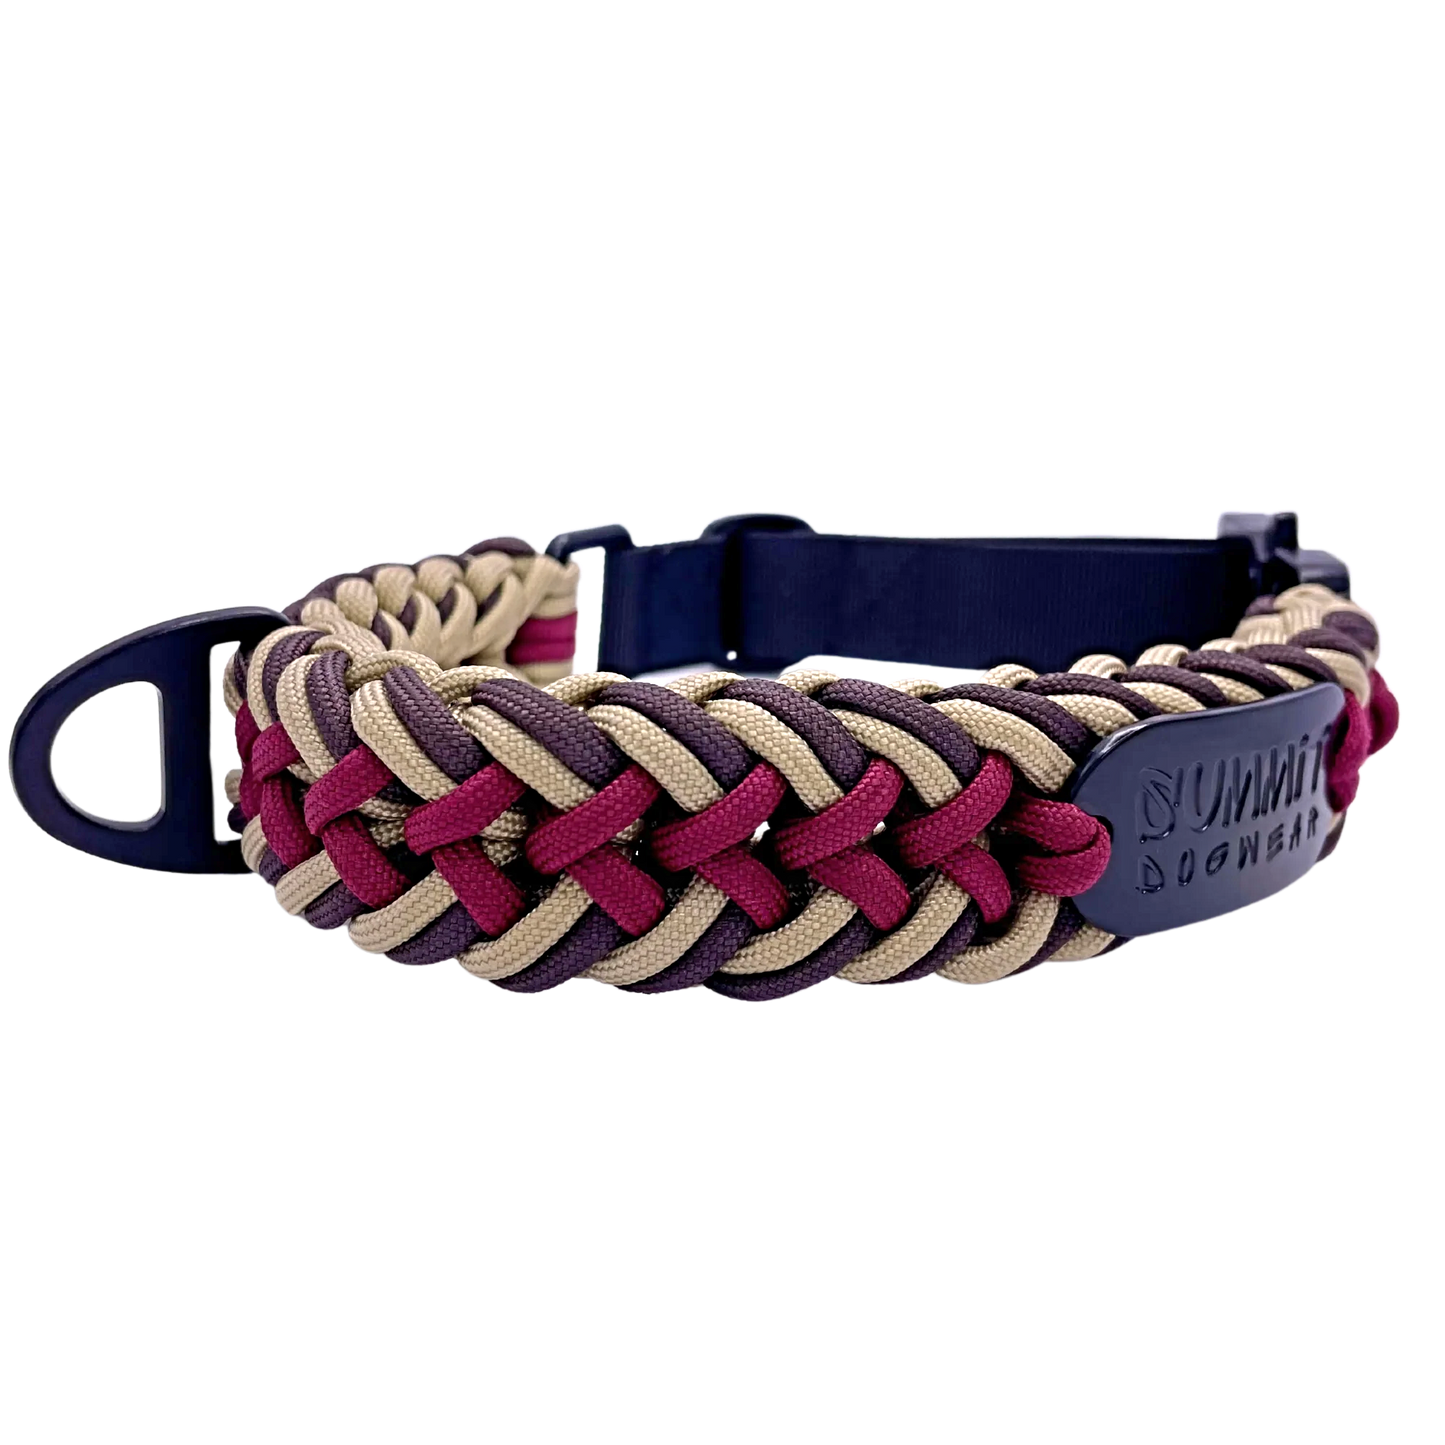 Premium ultra strong quick-release tactical braided paracord dog collar in nomad colors